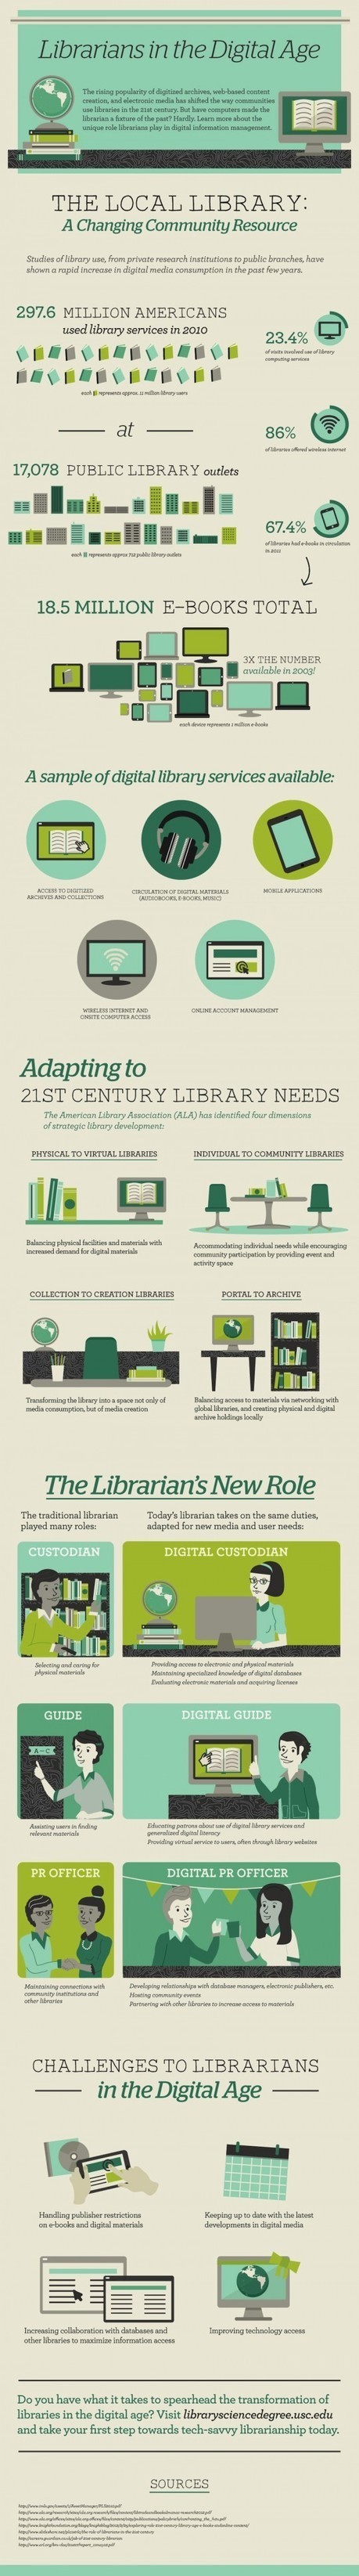 In digital age, librarians are needed more than ever [infographic] | iGeneration - 21st Century Education (Pedagogy & Digital Innovation) | Scoop.it